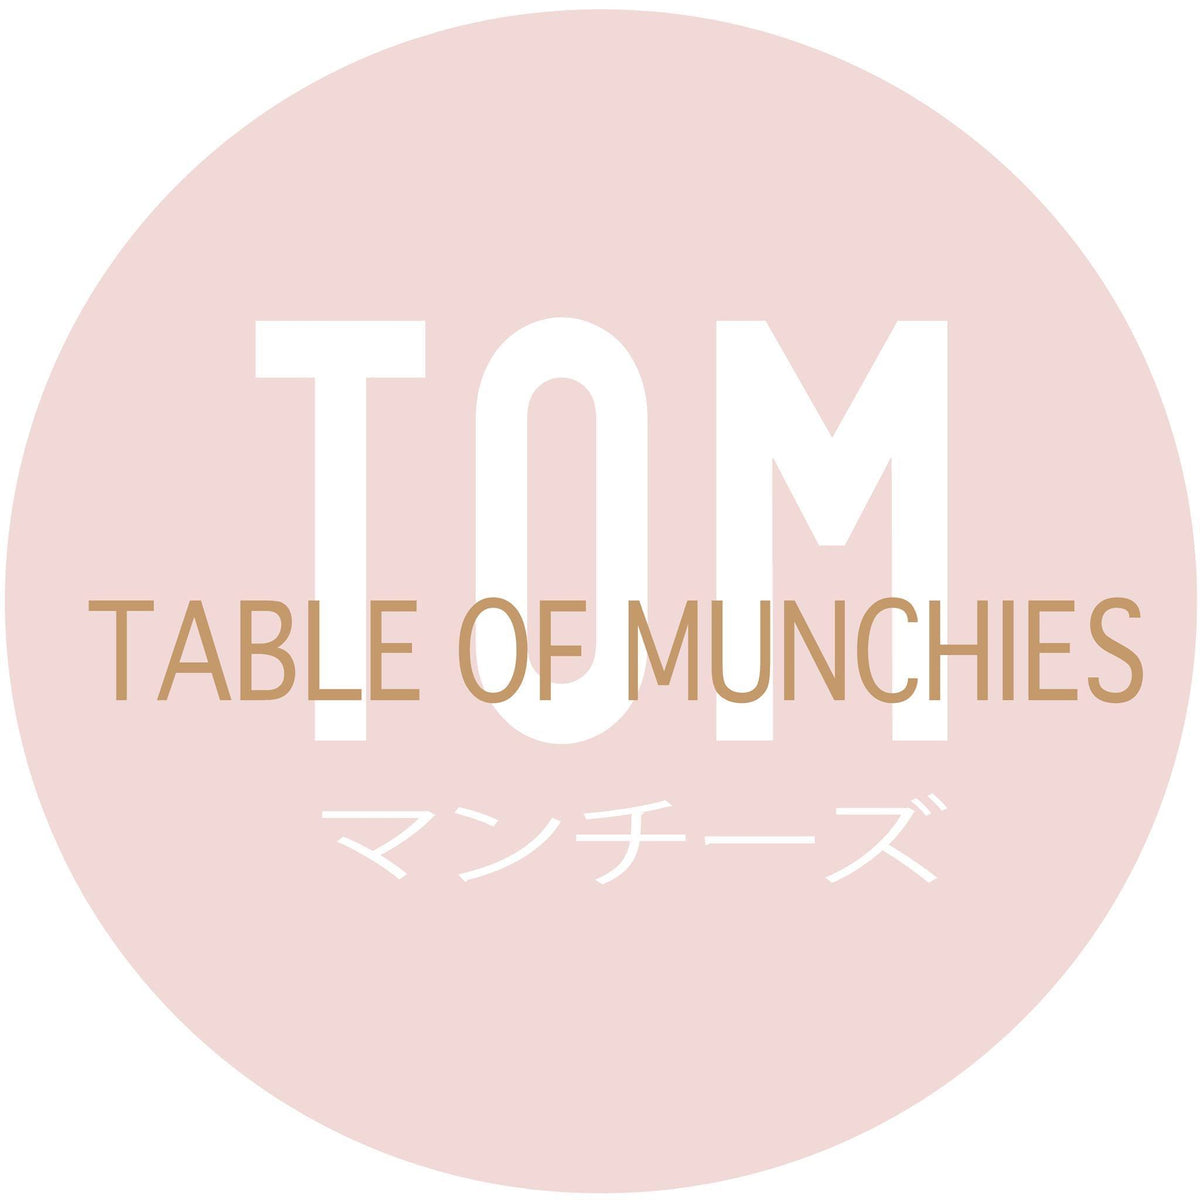 ”Table